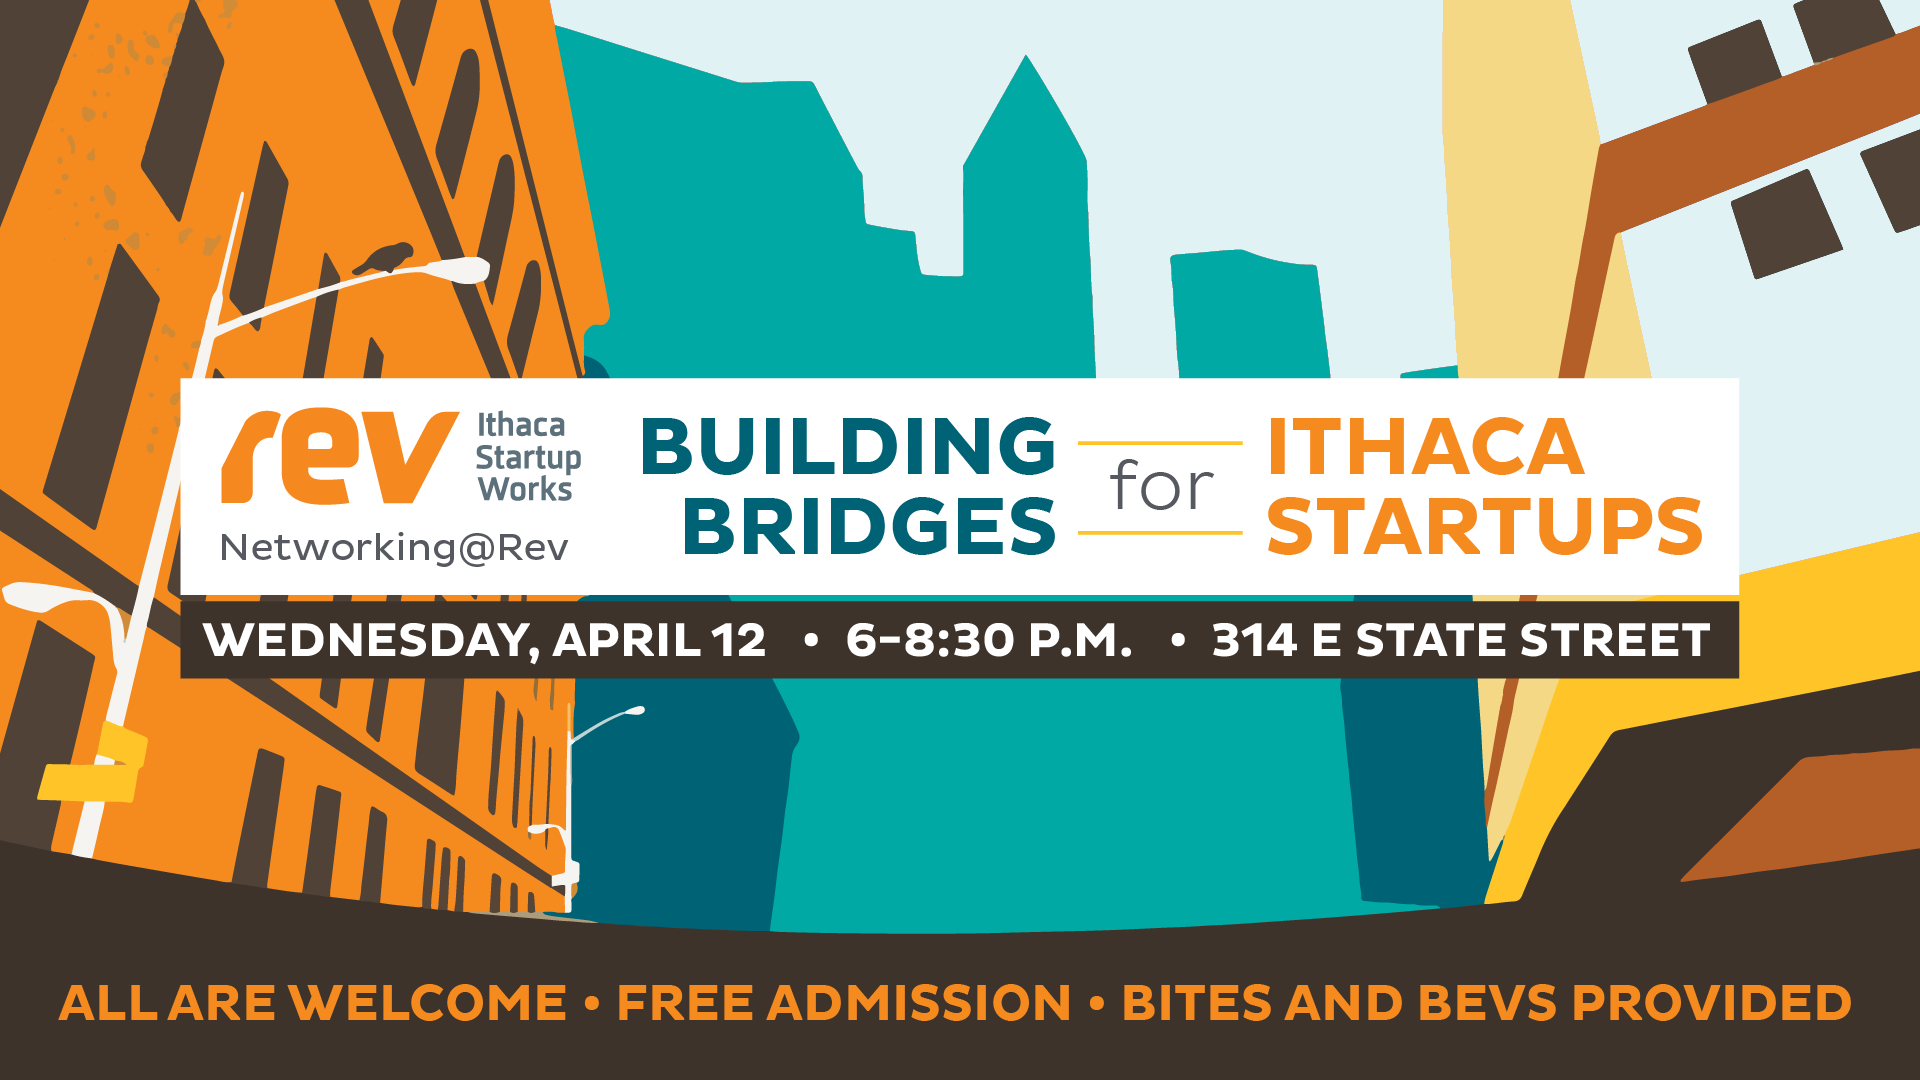 Networking@Rev: Building Bridges for Ithaca Startups on April 12 from 6 to 8:30 PM at Rev: Ithaca Startup Works.